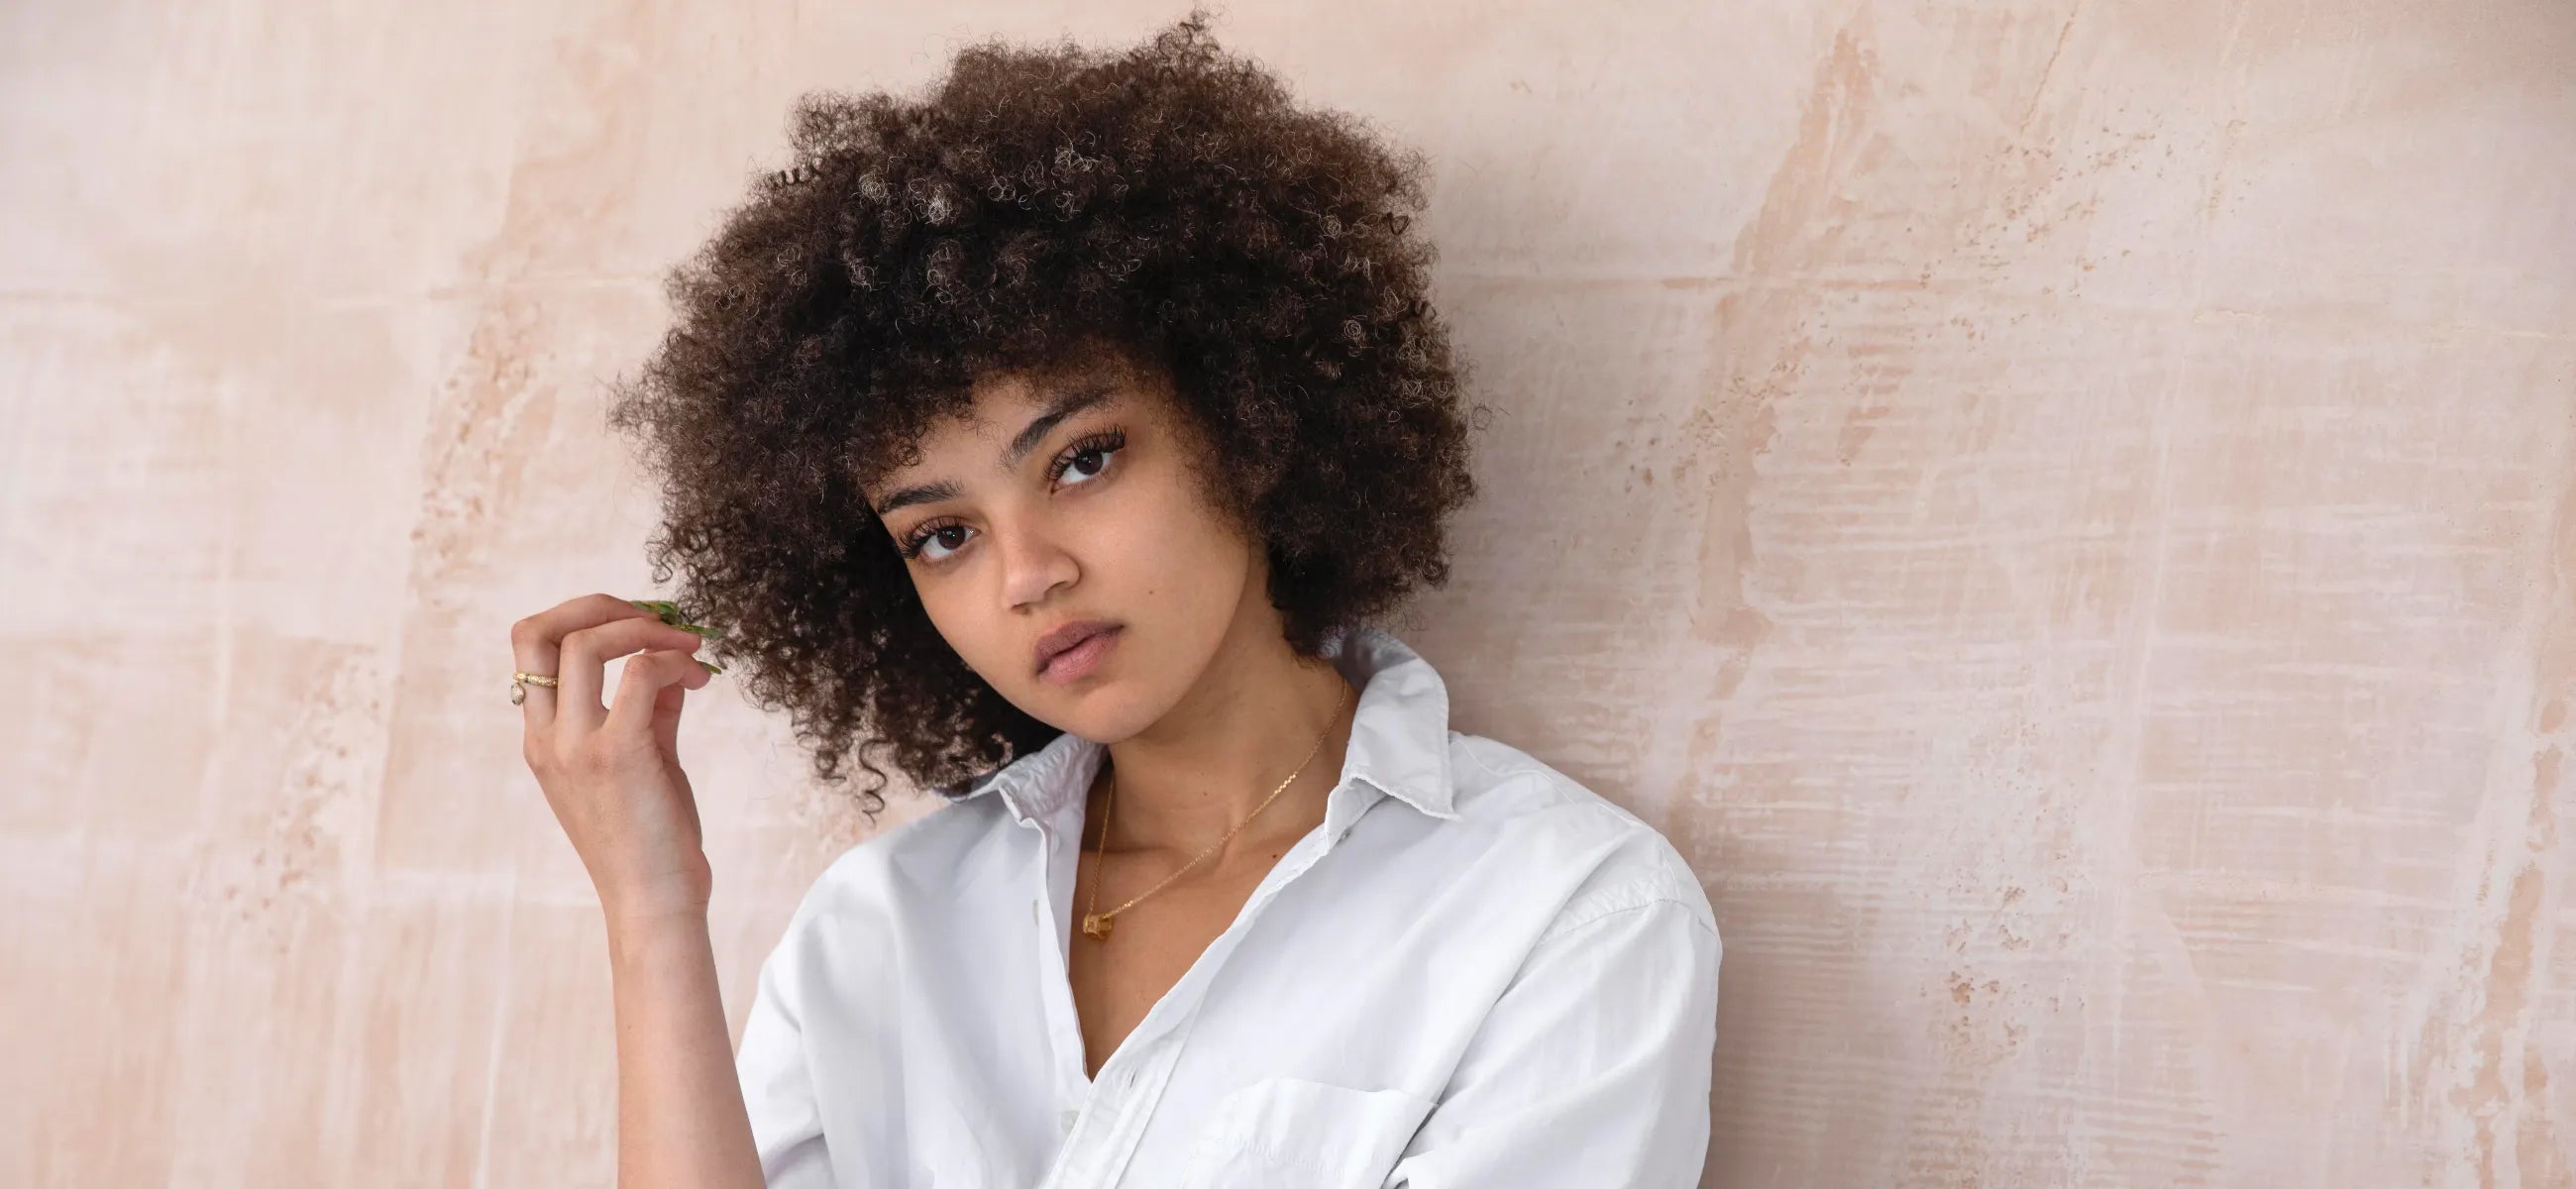 The best way to air dry your curly hair in professional yet simple steps